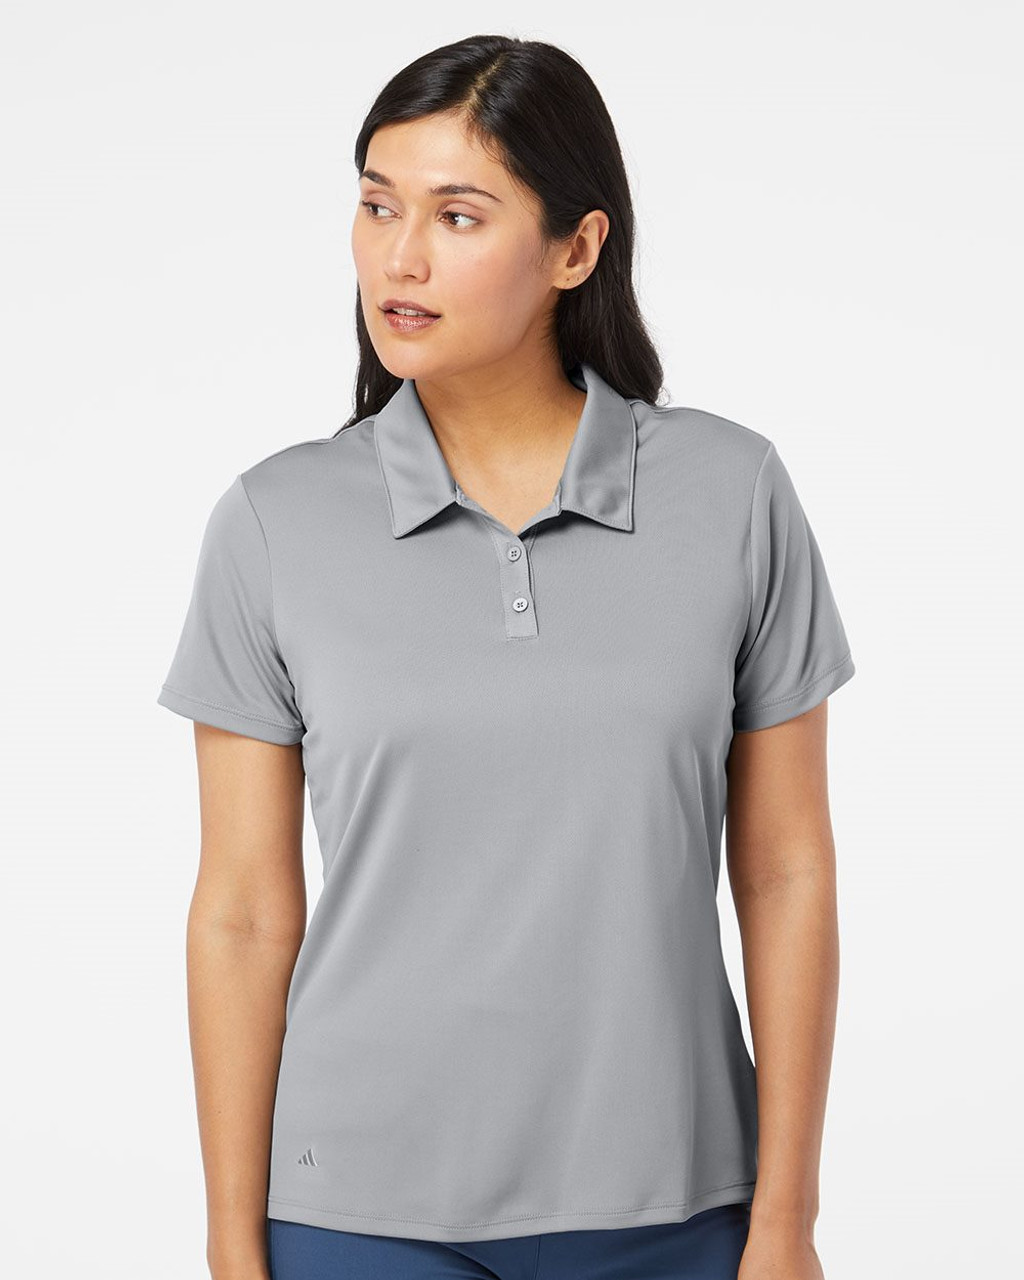 Embroidered Women's Performance Polo - A231